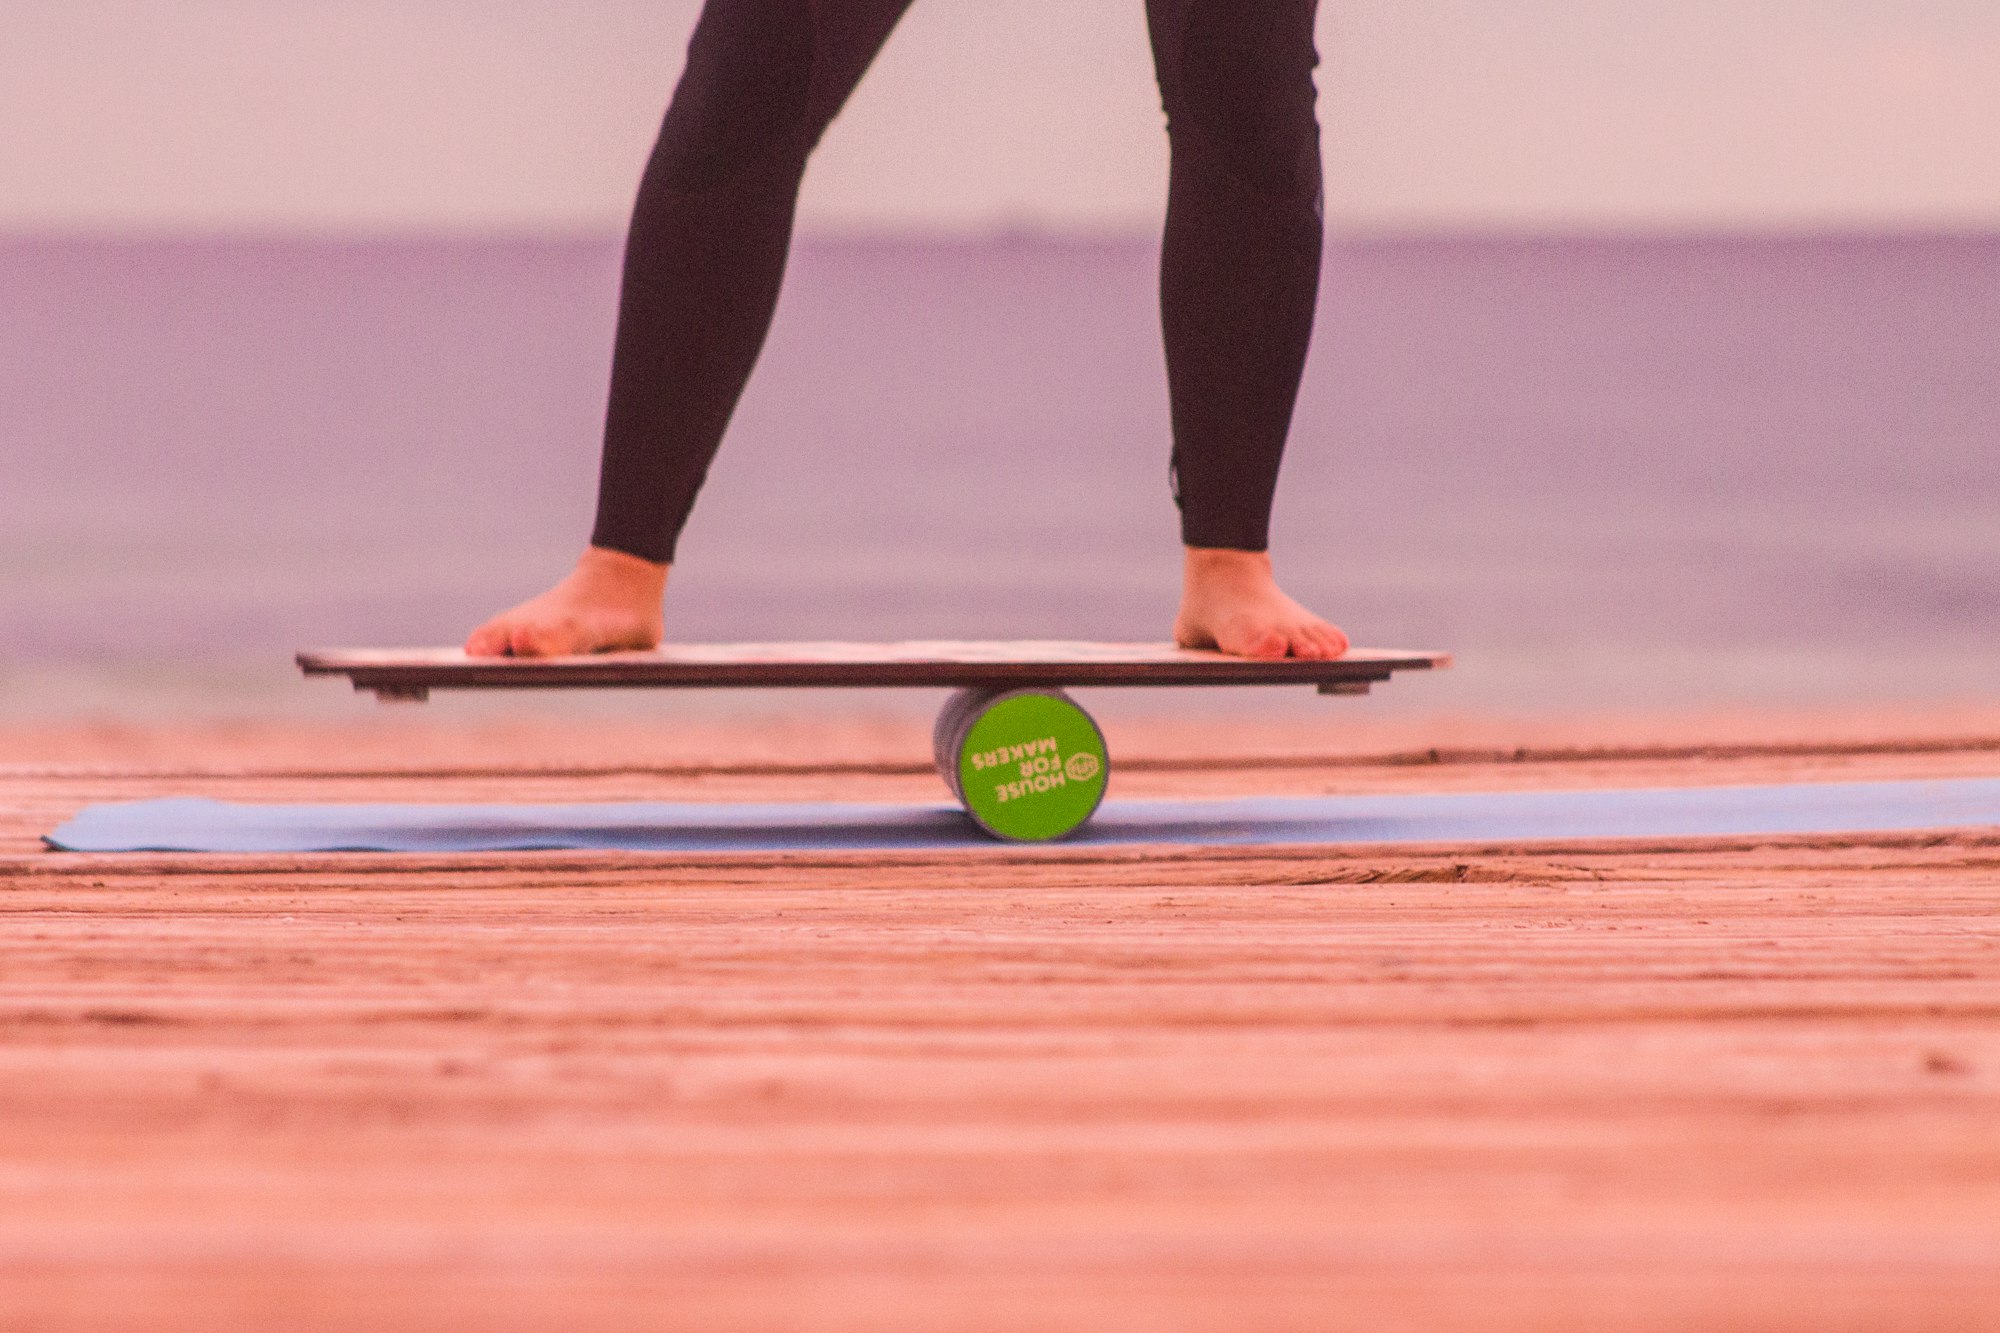 Using a balanceboard as training before surfing